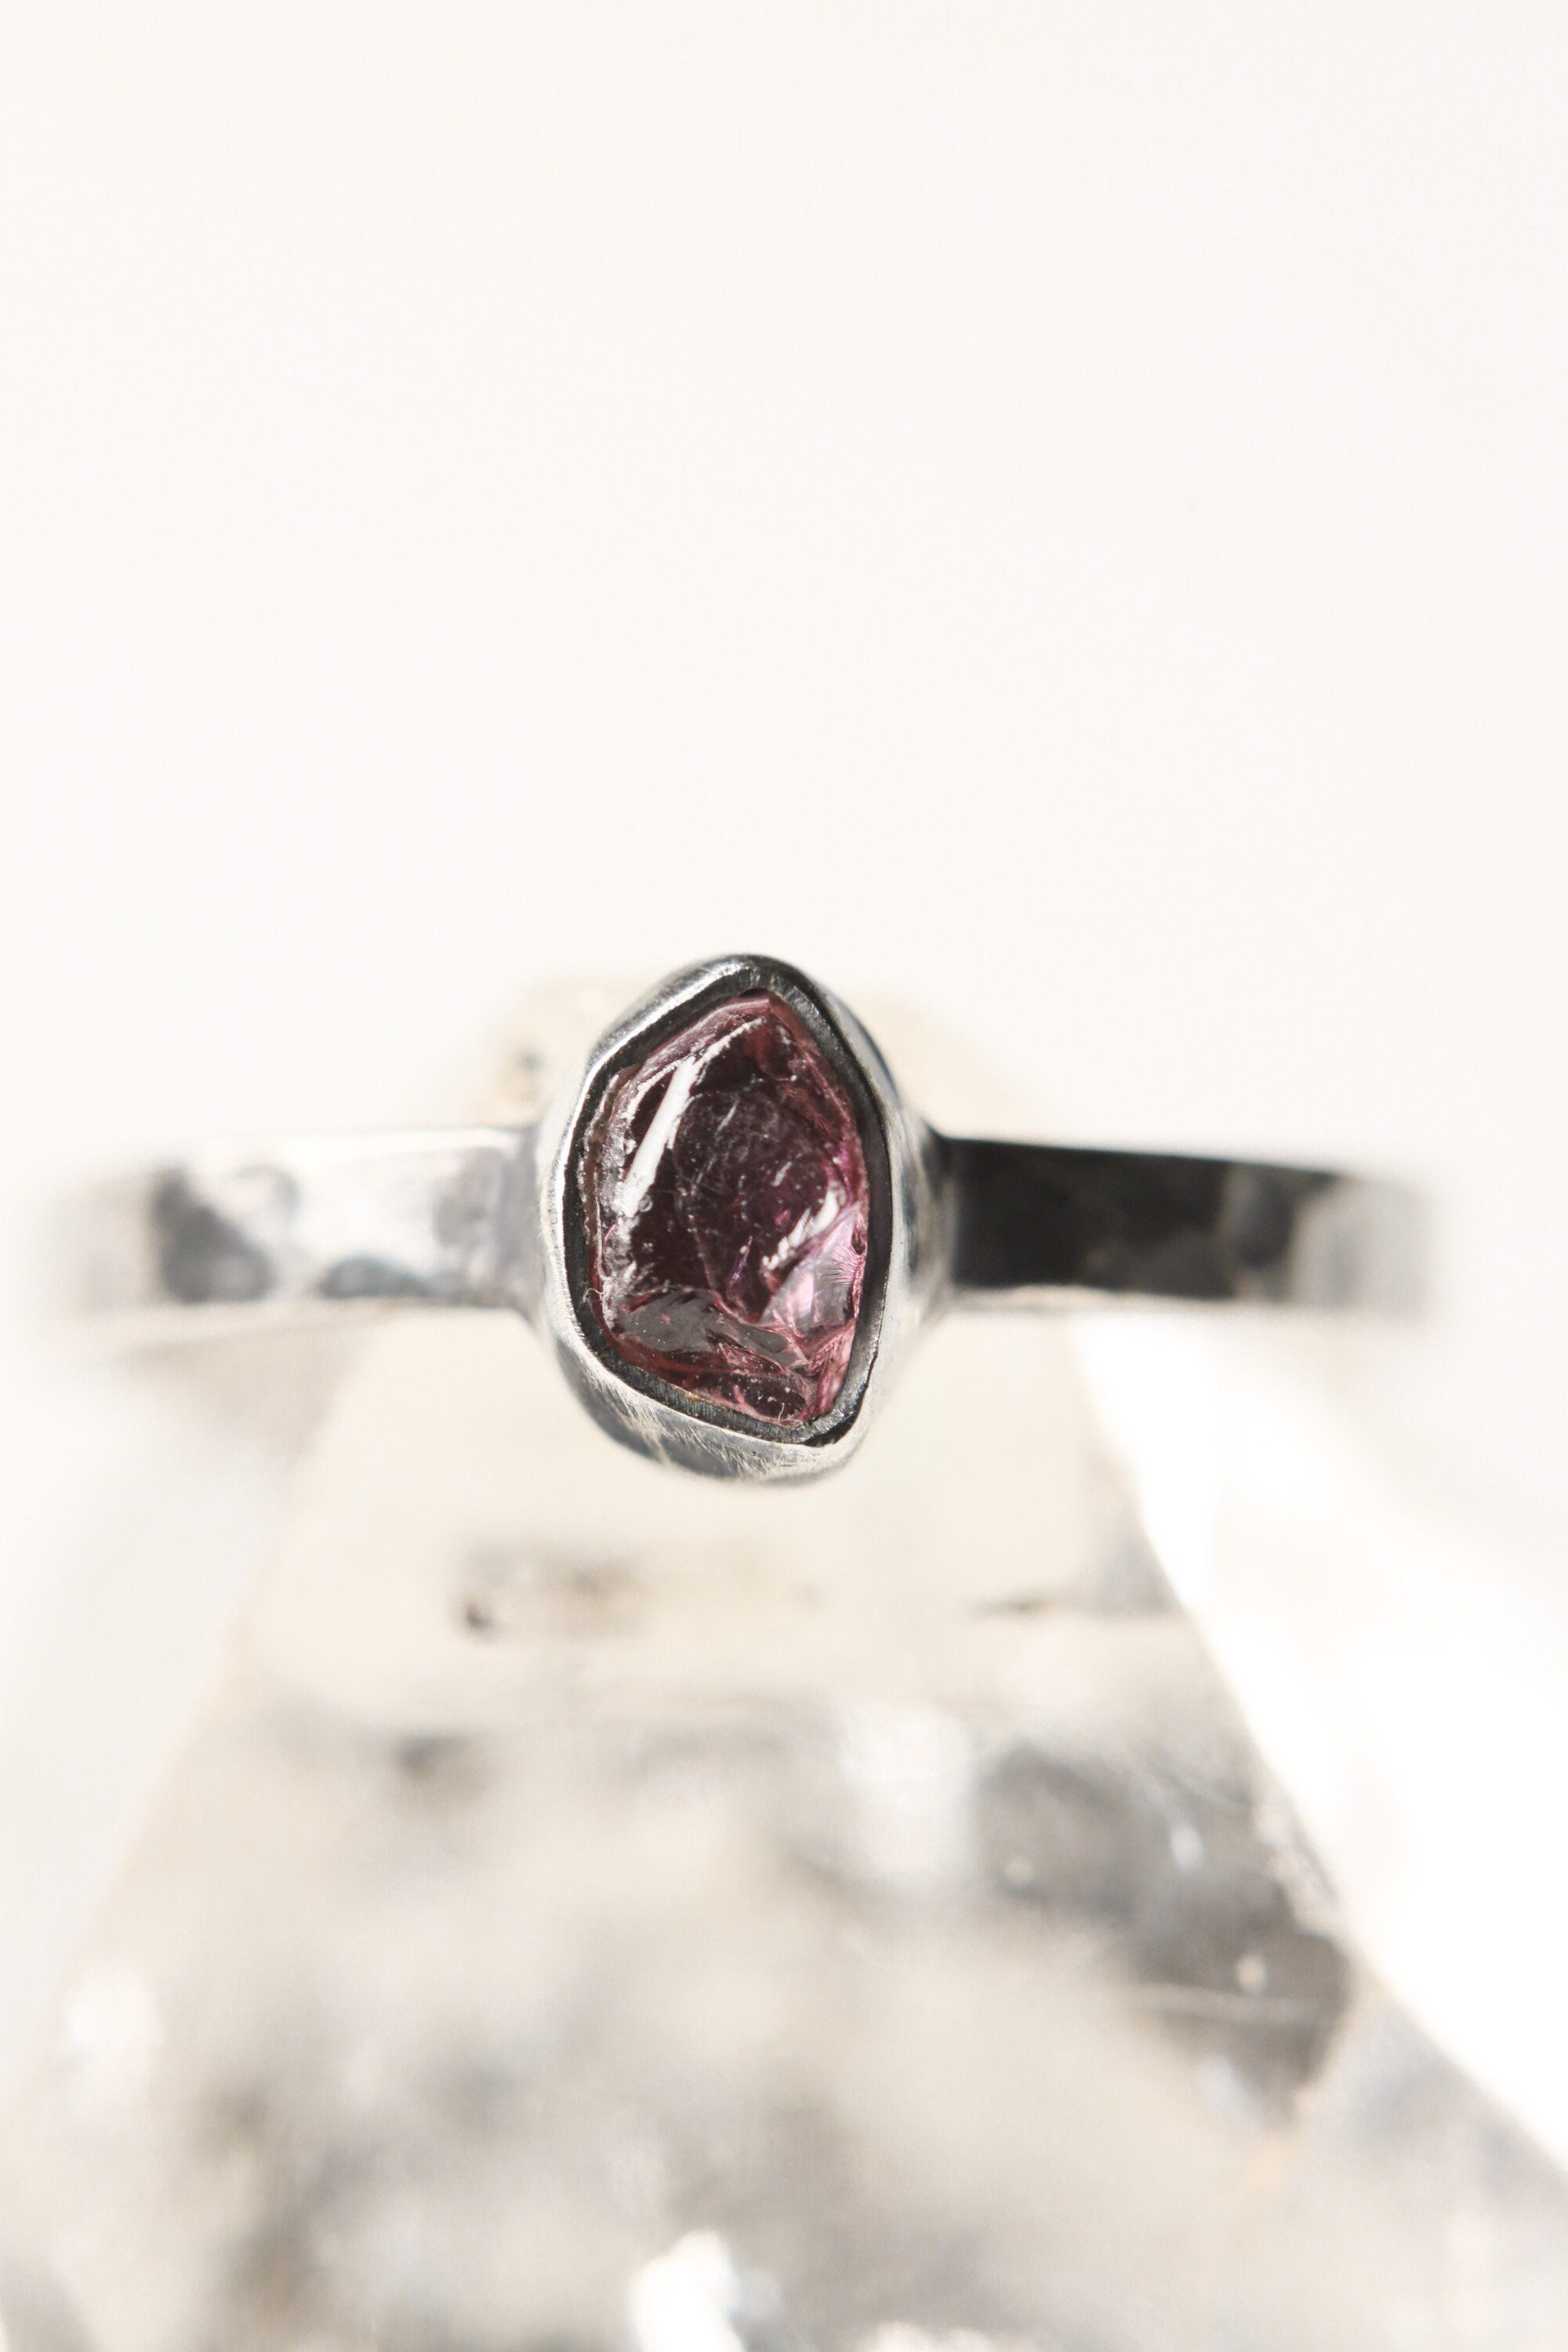 Eternal Blush - Sterling Silver Ring with Pink Tourmaline - Size 6 US - NO/01